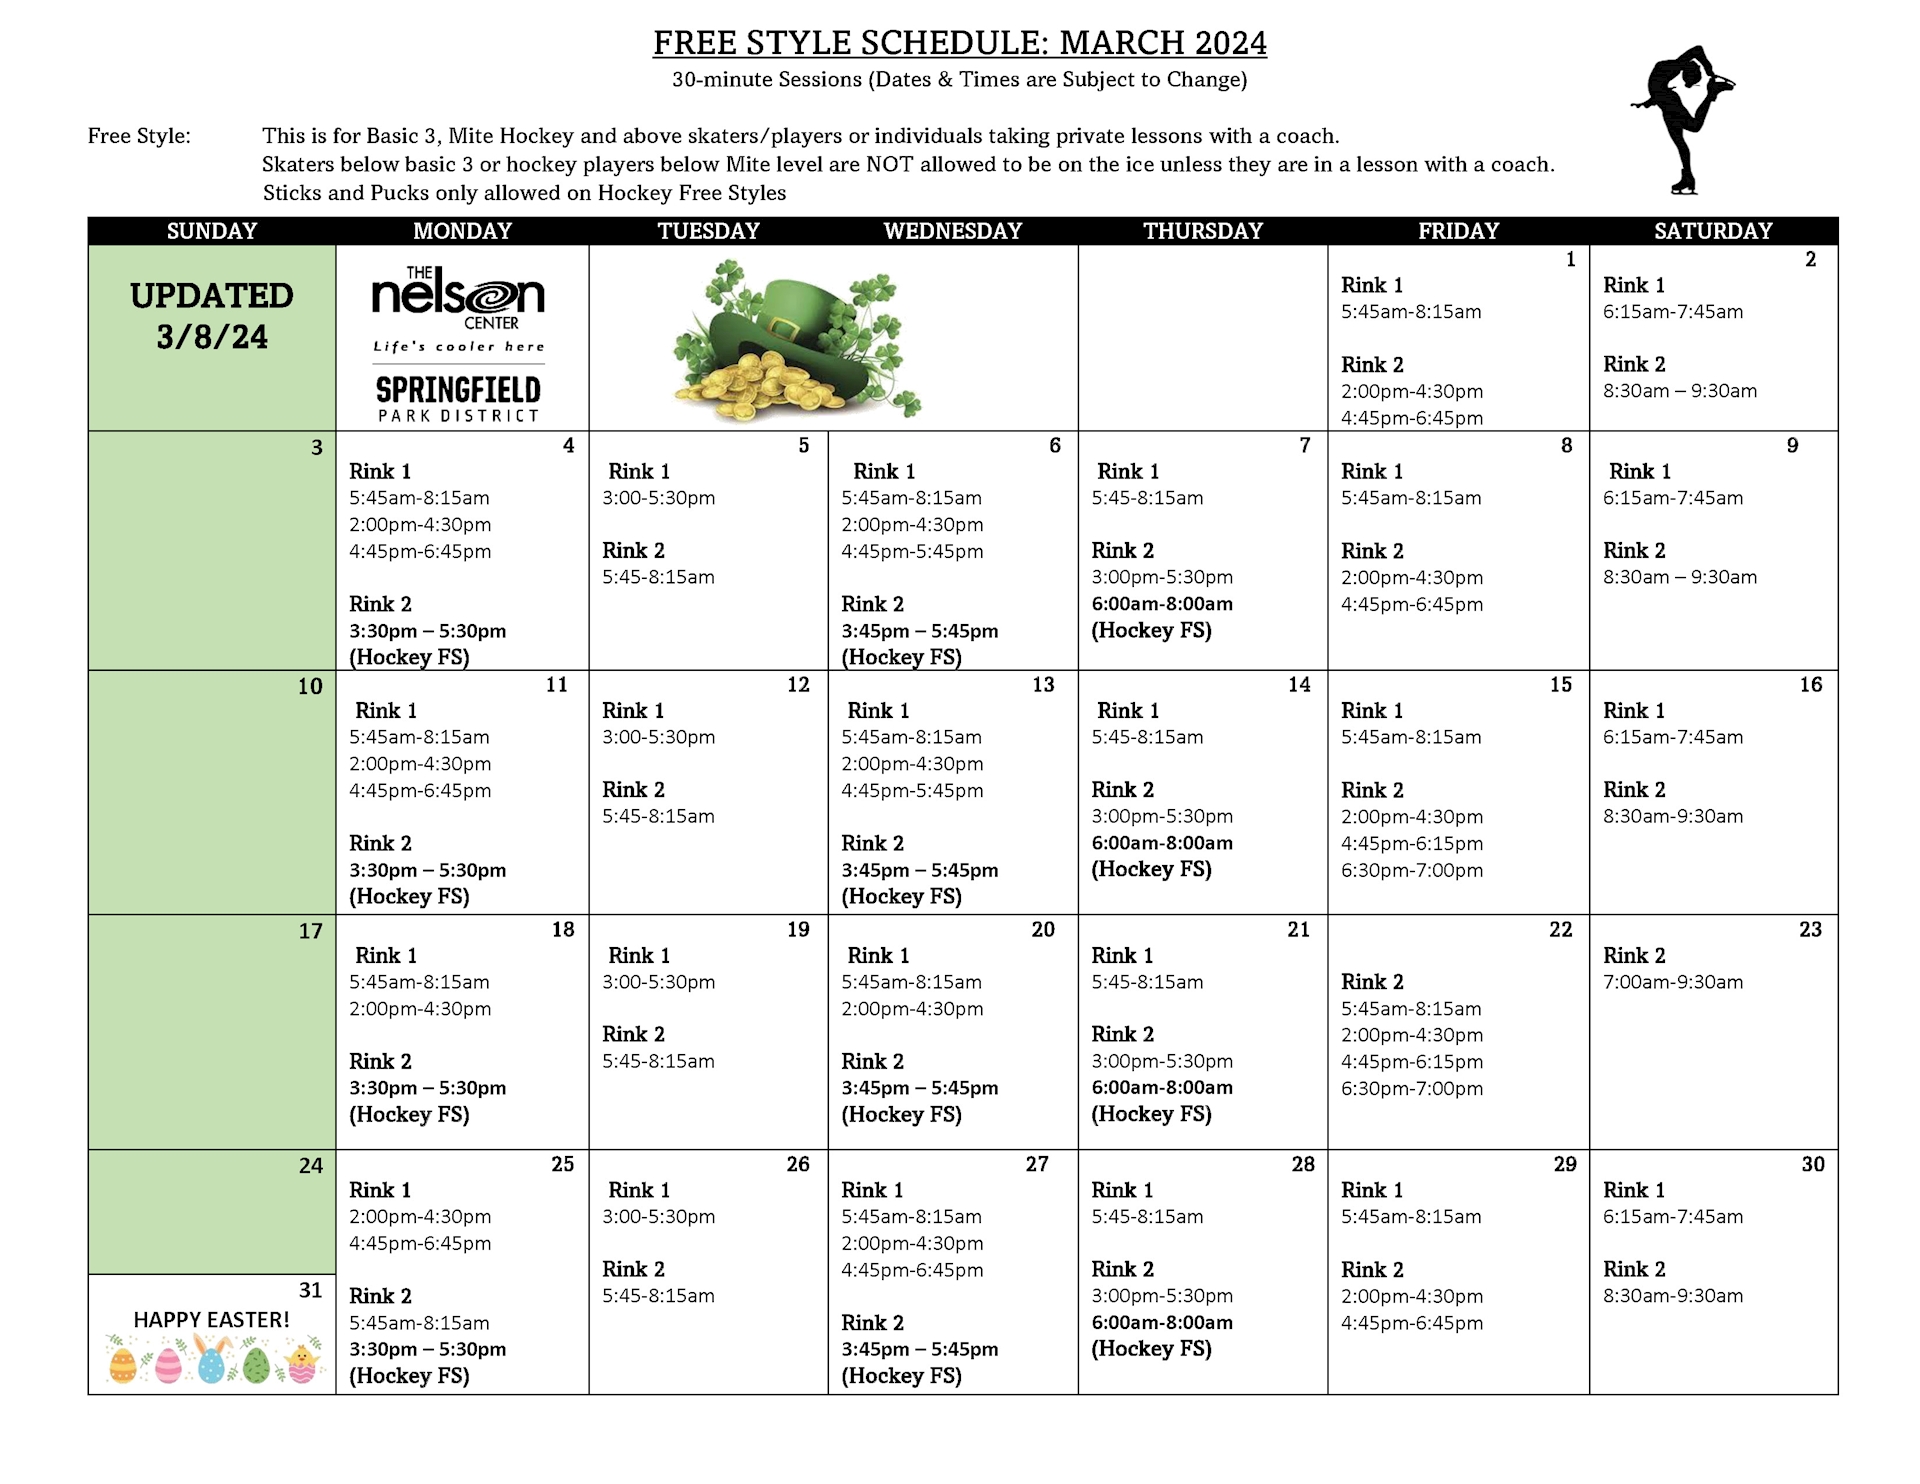 2024 March Free Style Schedule